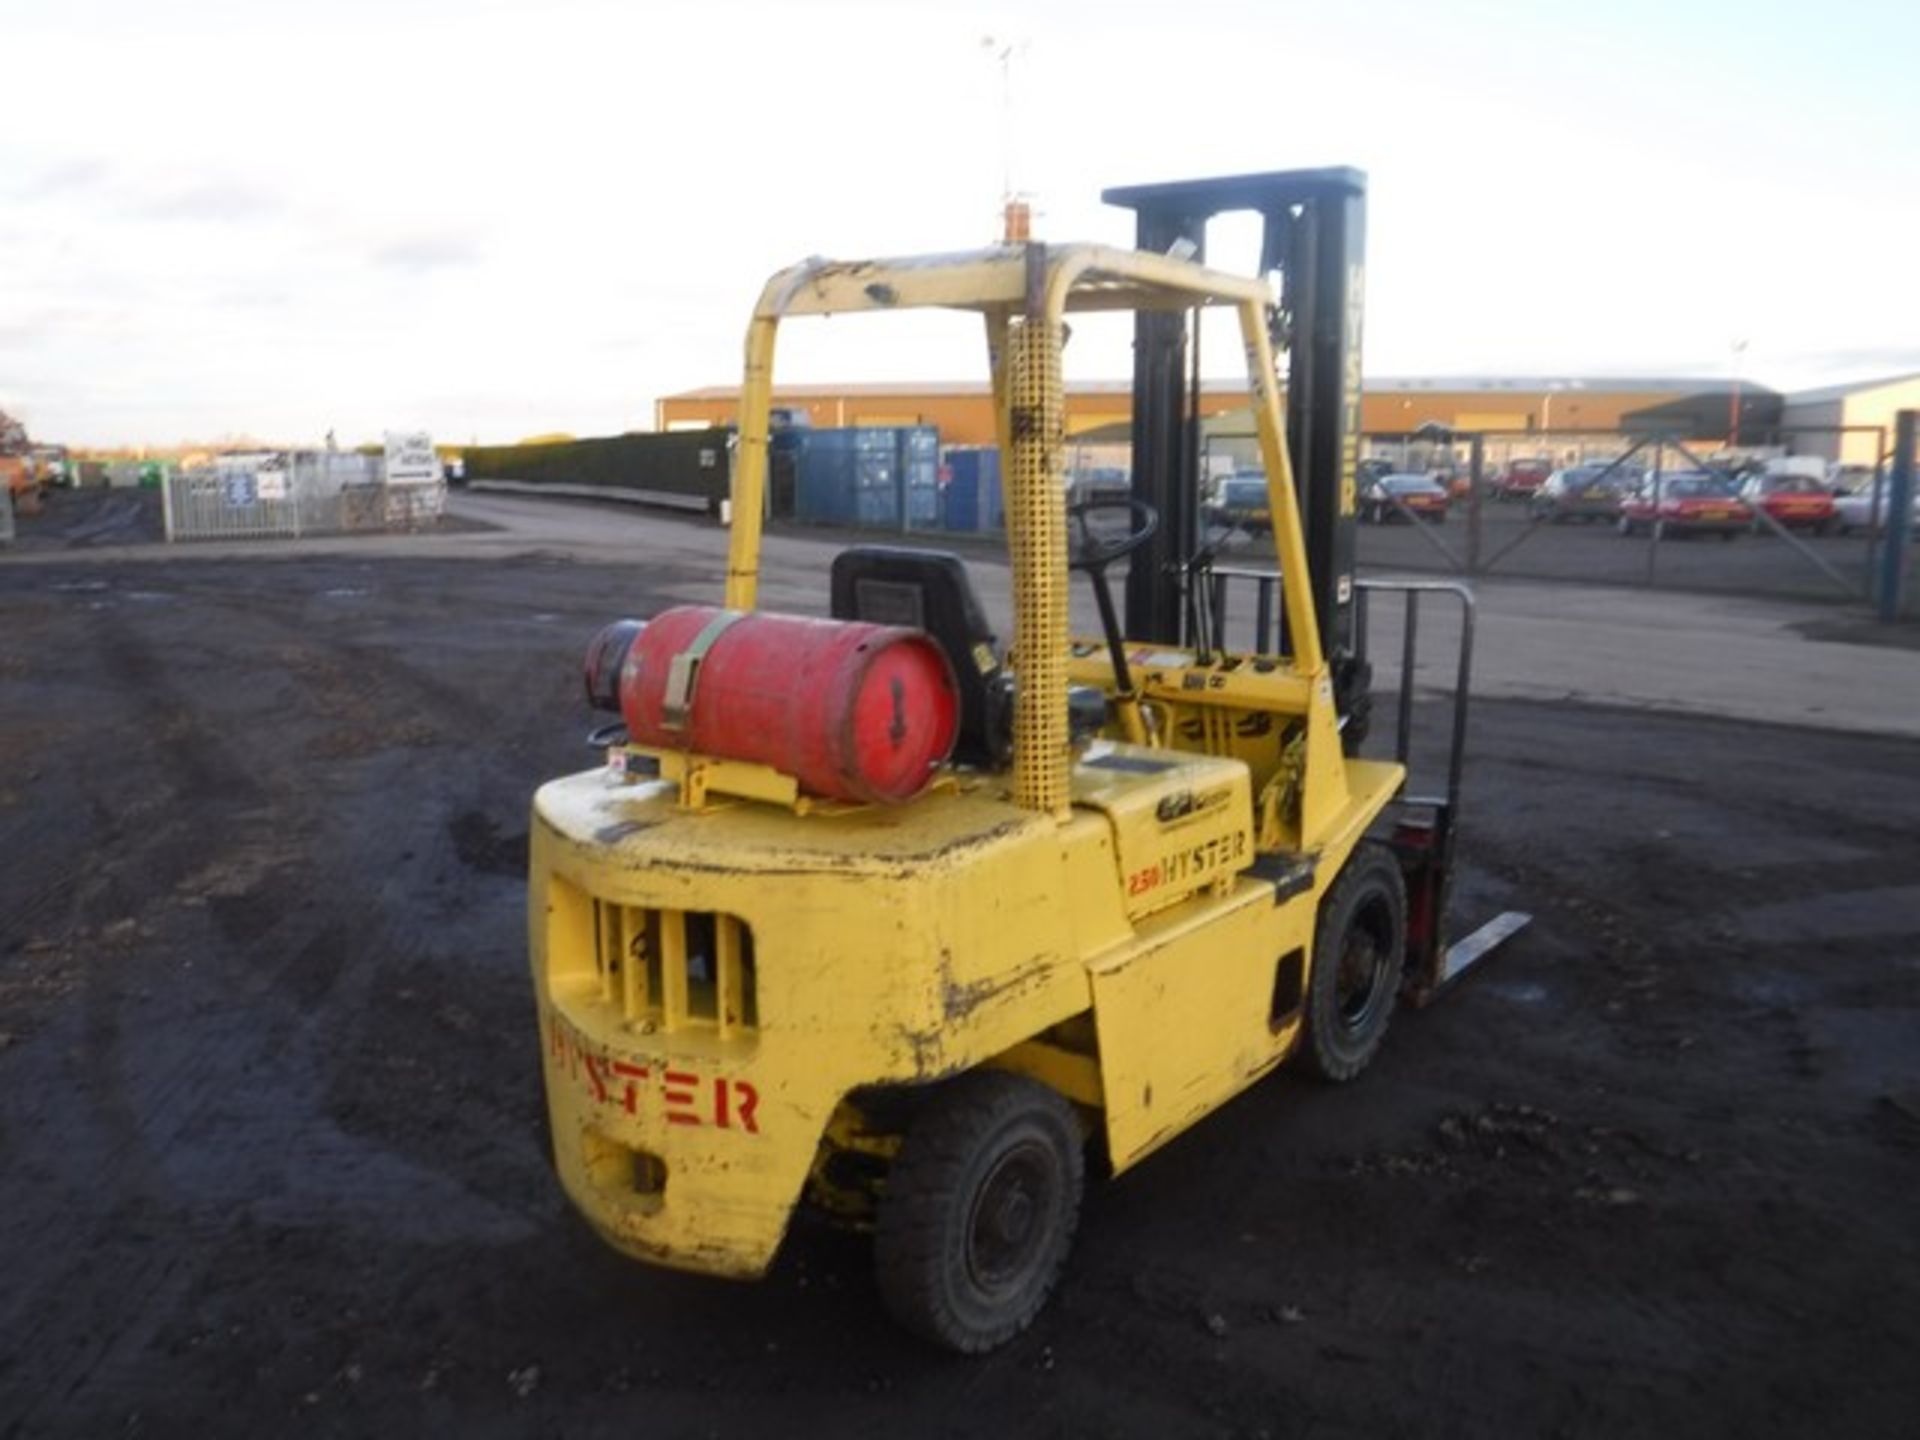 1989 HYSTER H2.50XL 2.5 tone gas forklift c/w side shift. S/NA177B36136K 650hrs (not verified) - Image 5 of 11